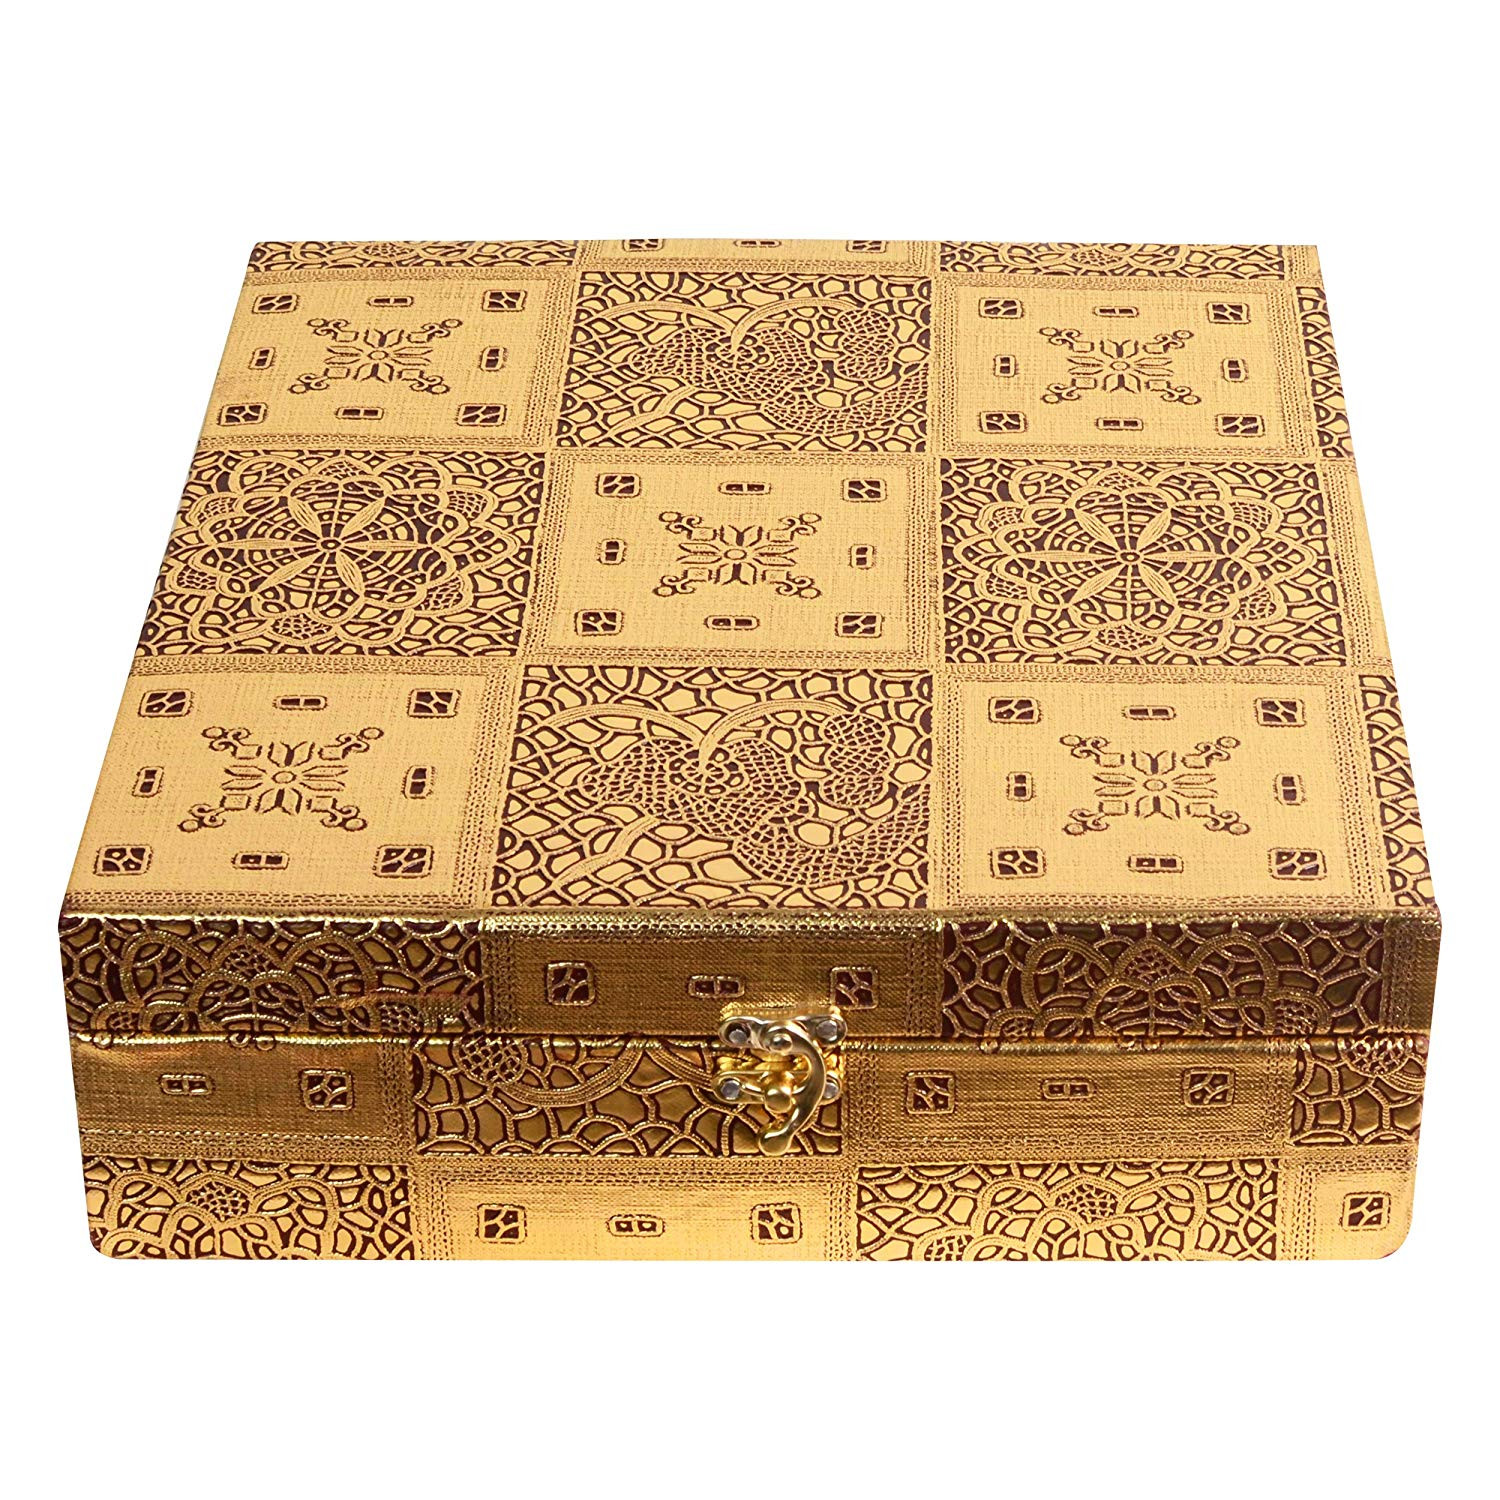 Kuber Industries Wooden Four Rod Bangle Storage Box with Lock System (Gold) -CTKTC39406